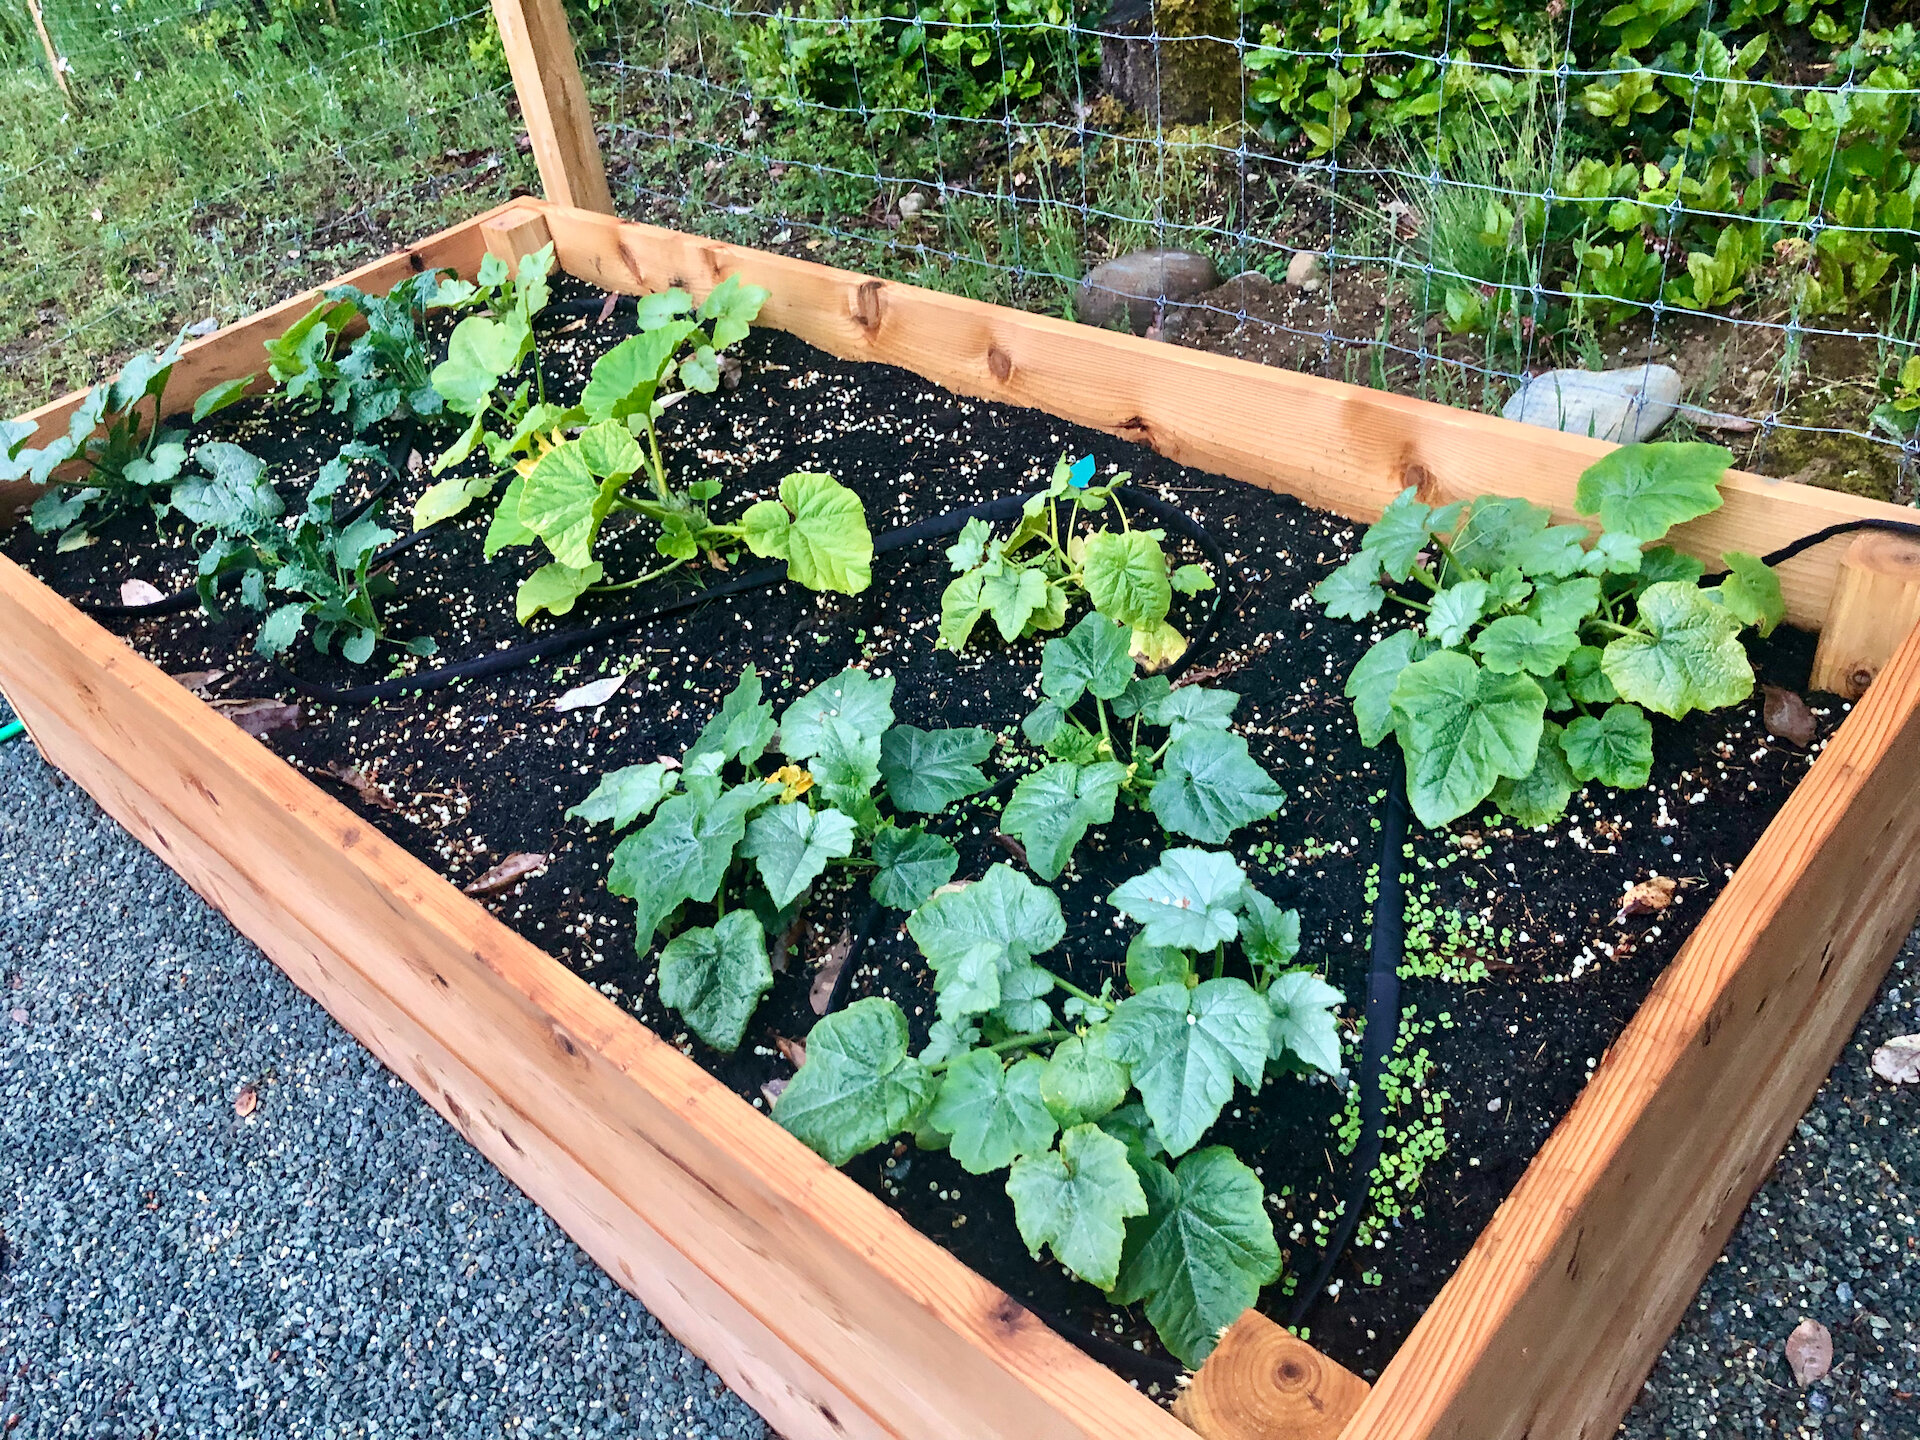  In one of the garden boxes, we planted all our squash and pumpkin plants. We’ll see how they do. 